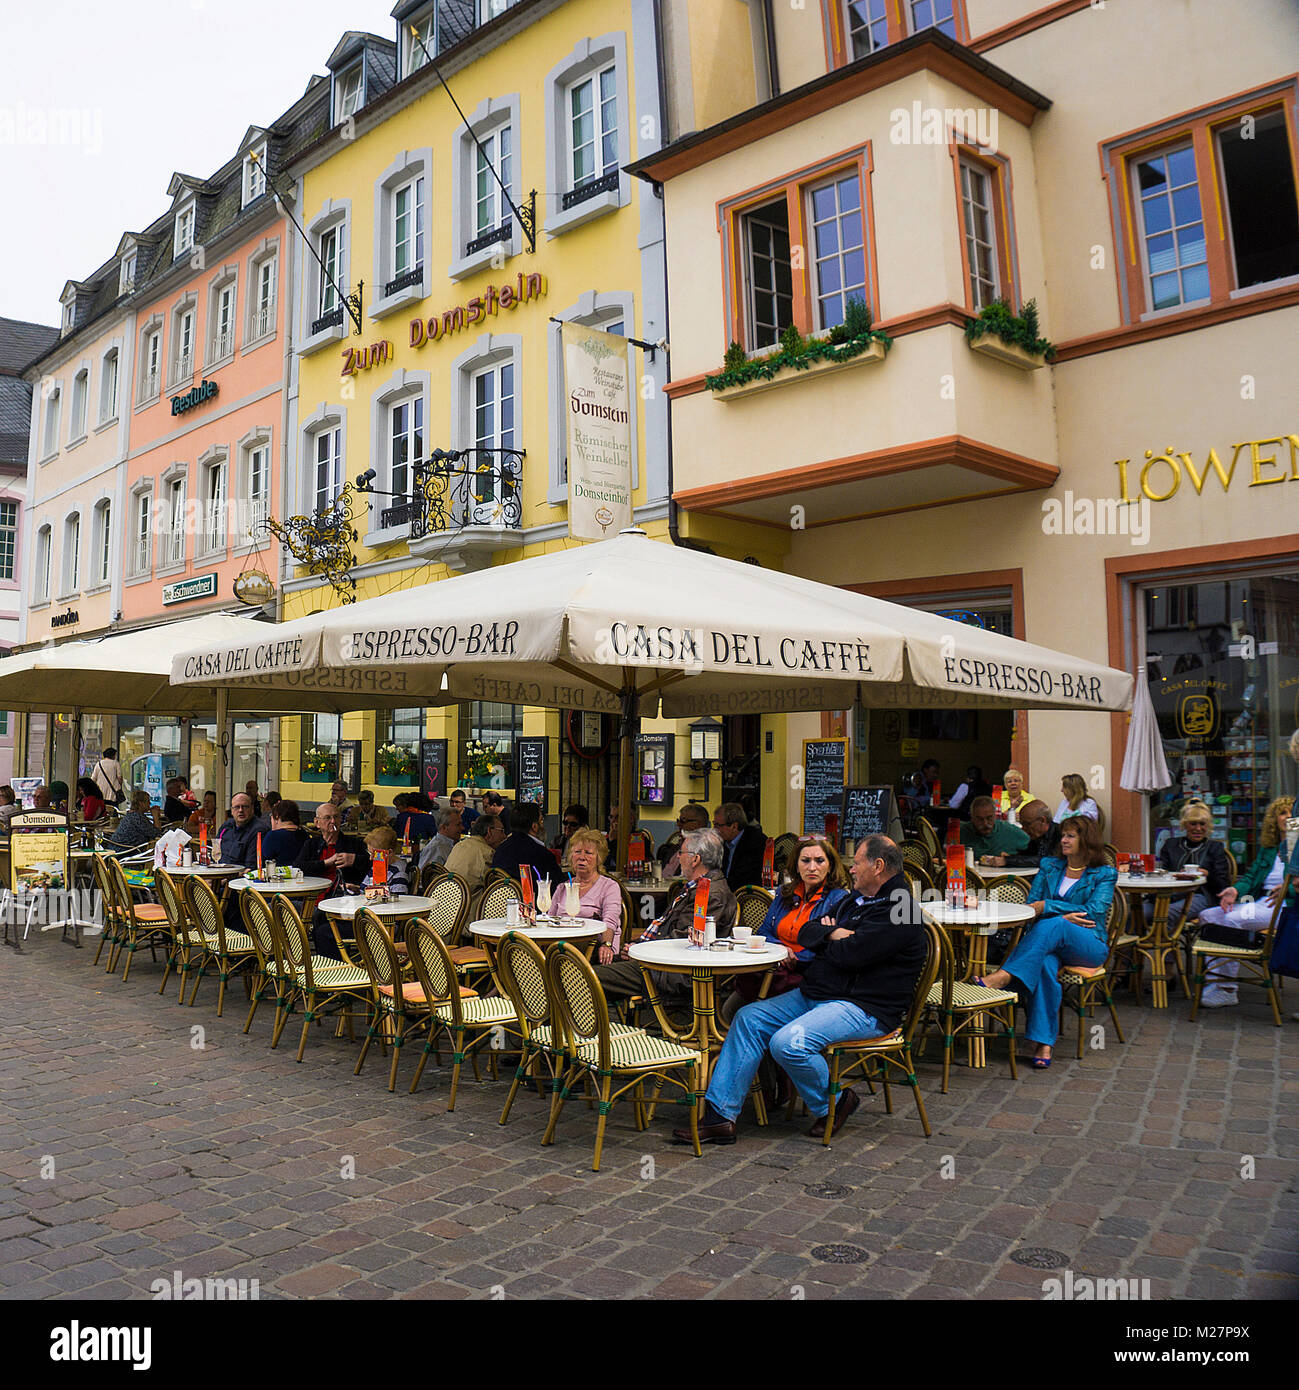 Street cafe, outside gastronomy at the main market, Trier, Moselle river, Rhineland-Palatinate, Germany, Europe Stock Photo